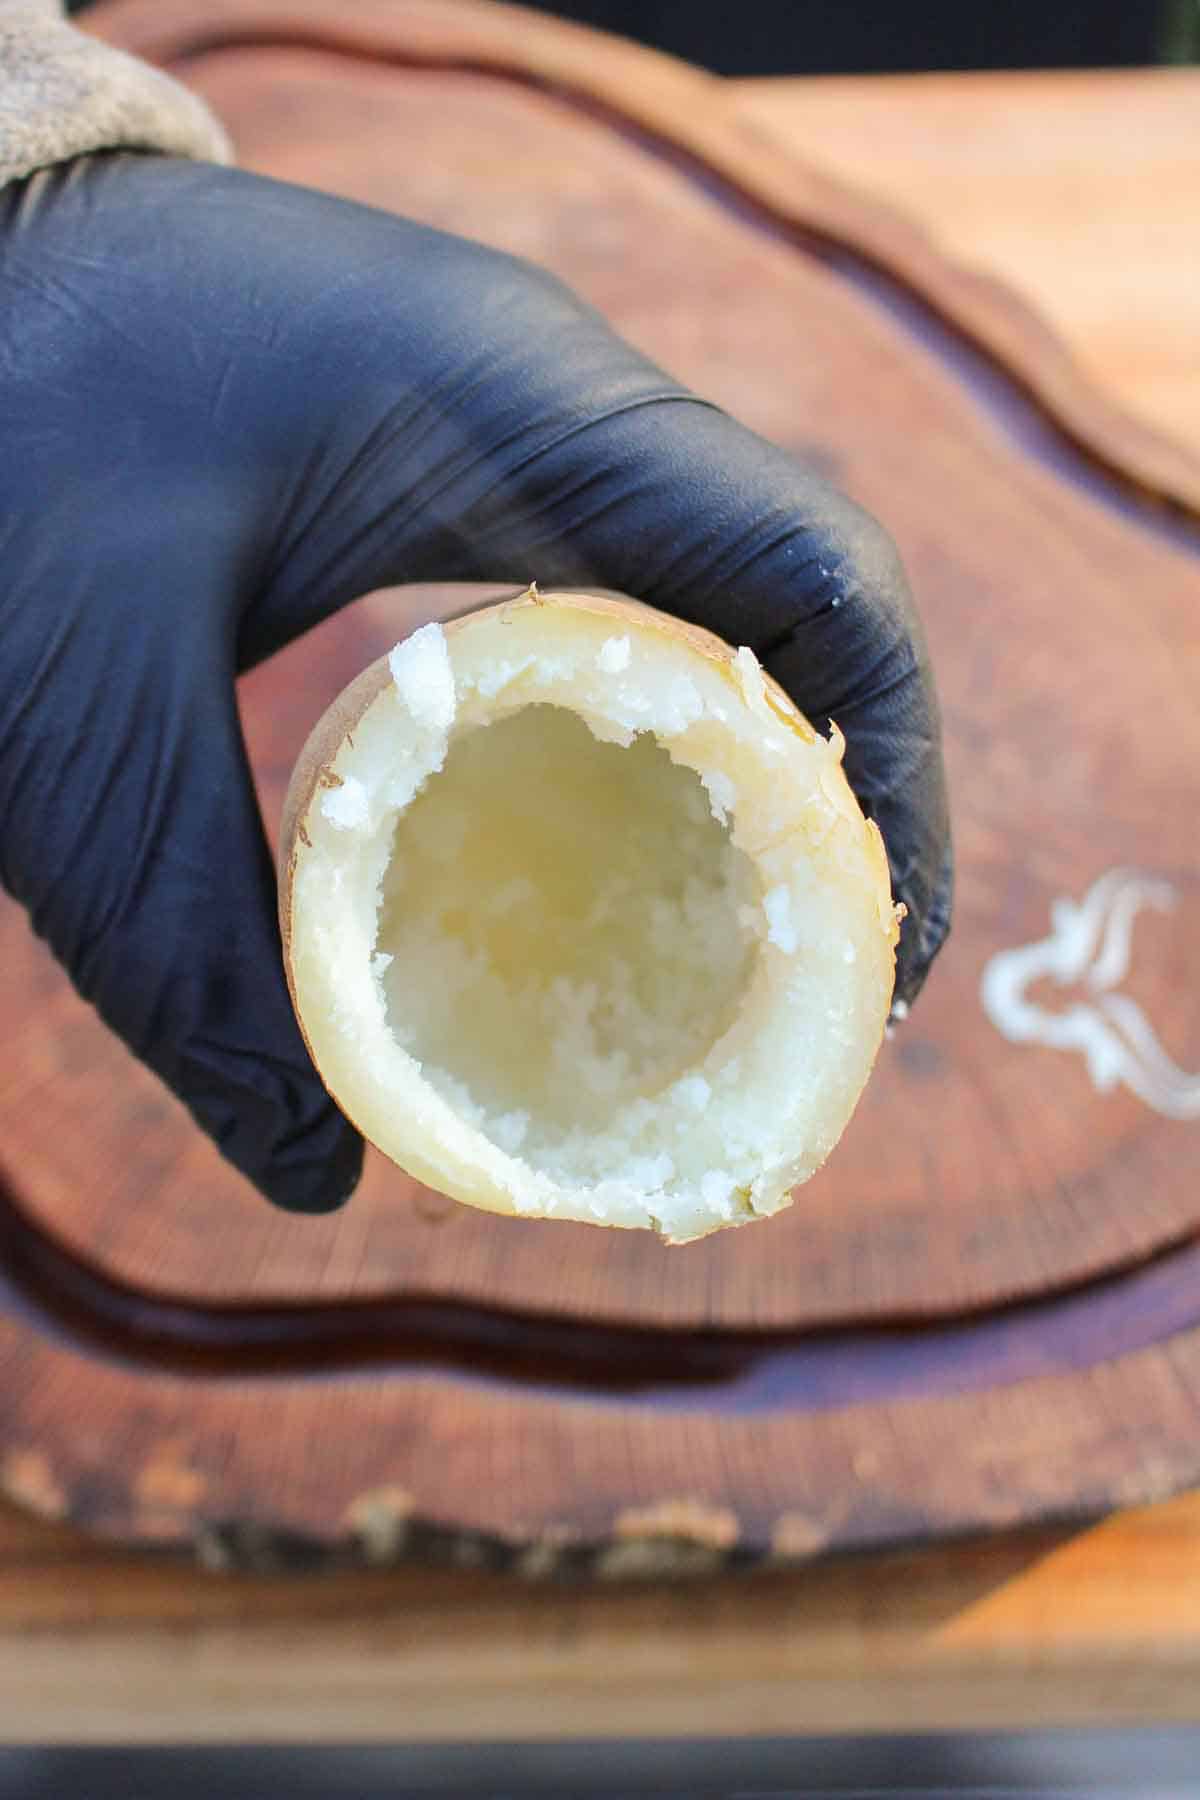 Showing the inside of a hollowed potato to the camera.